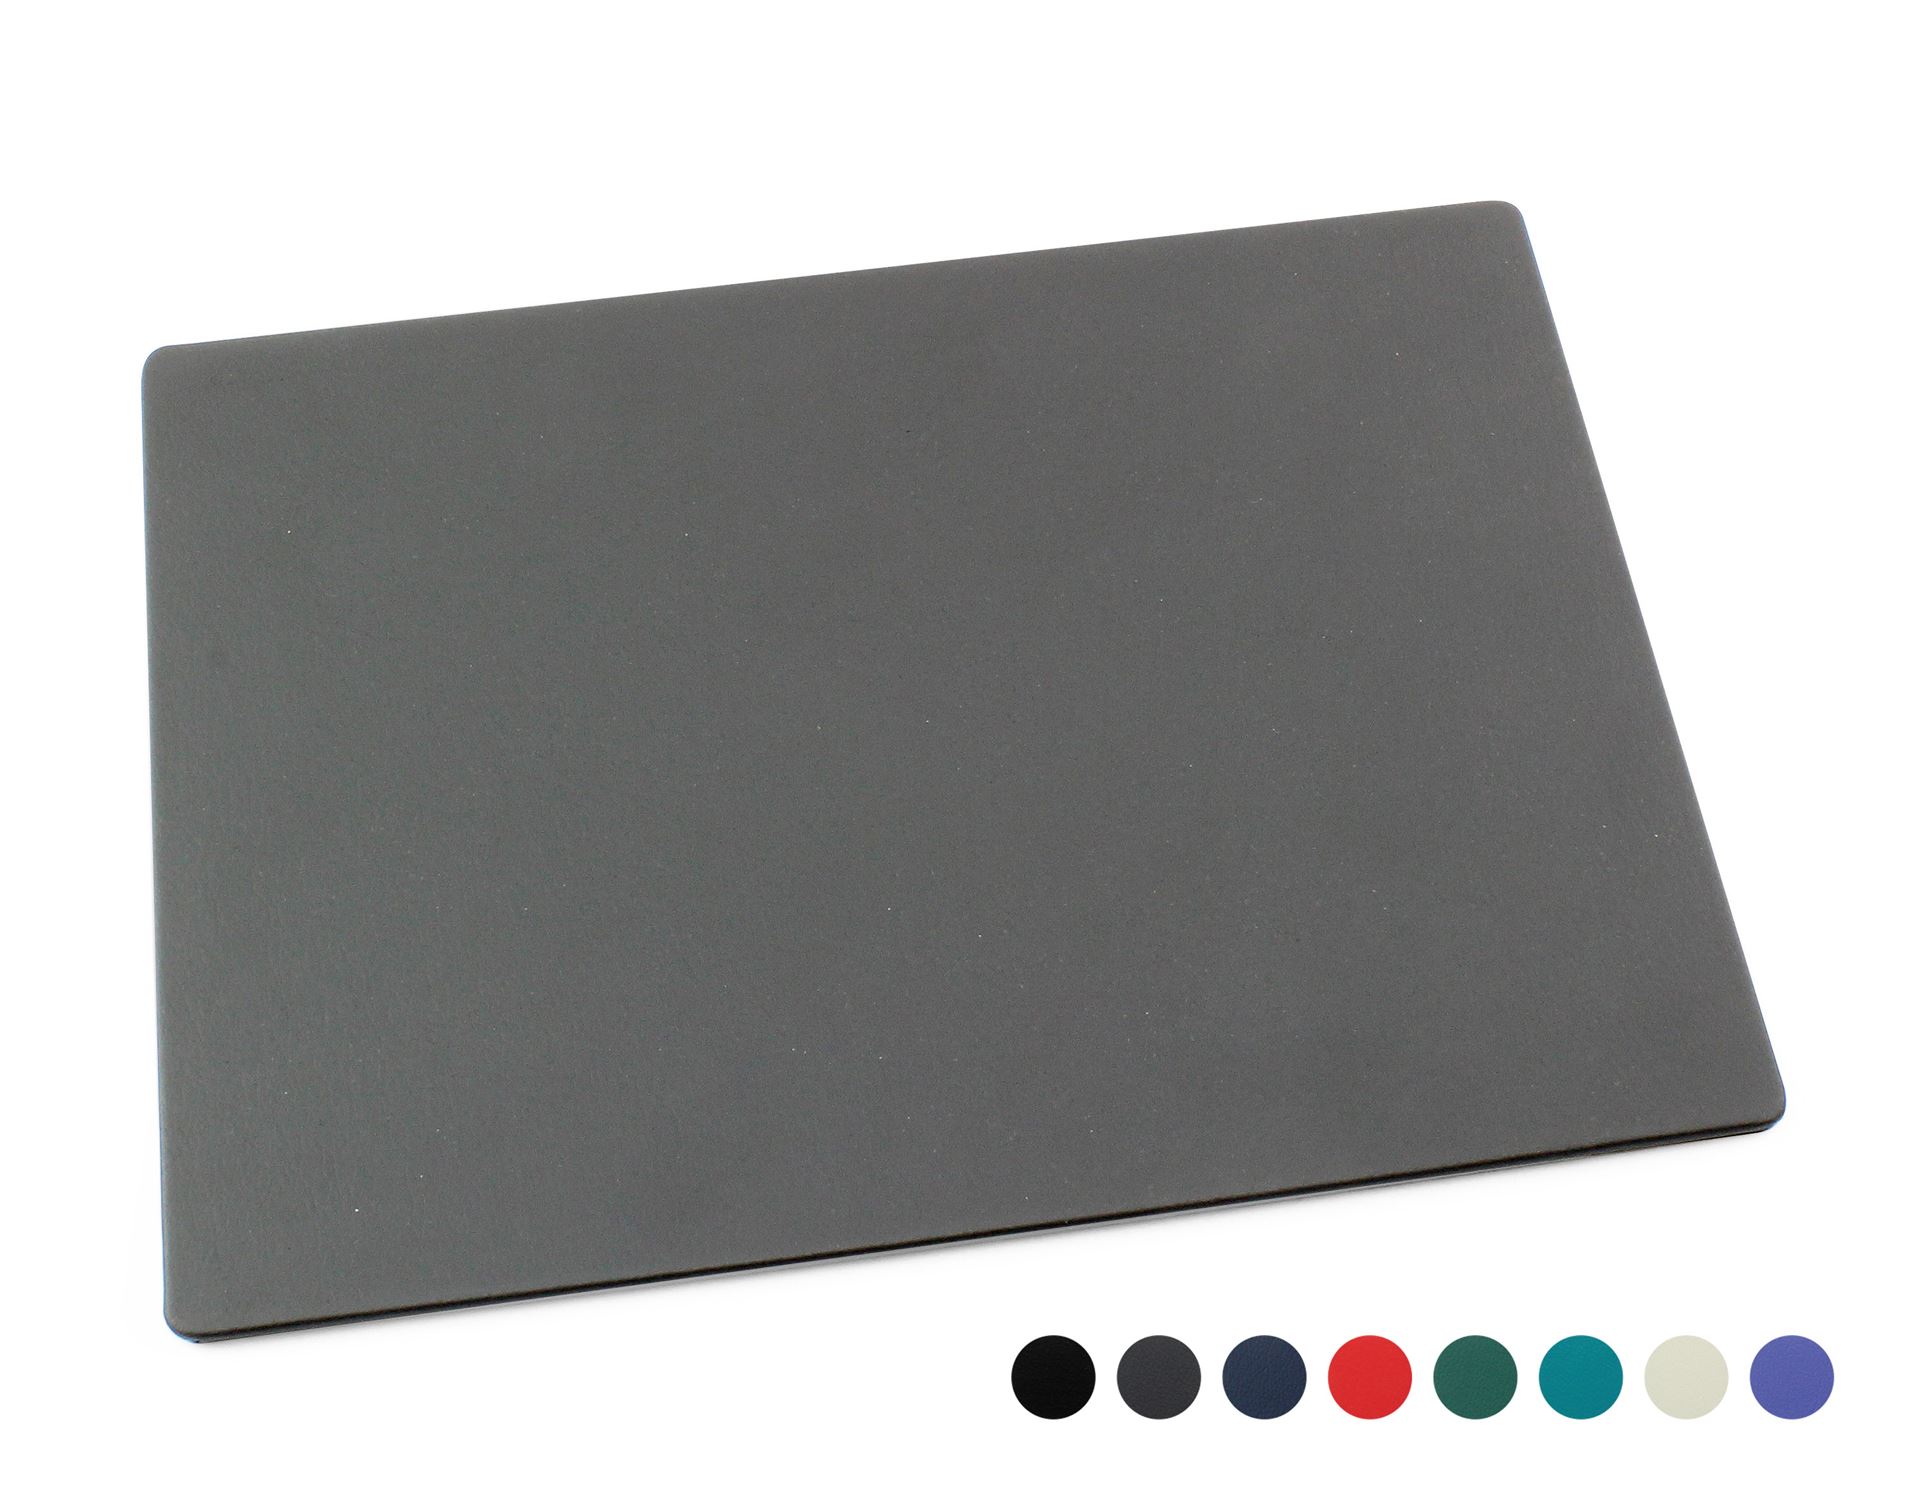 Recycled ELeather Desk Pad, made in the UK in a choice of 8 colours.